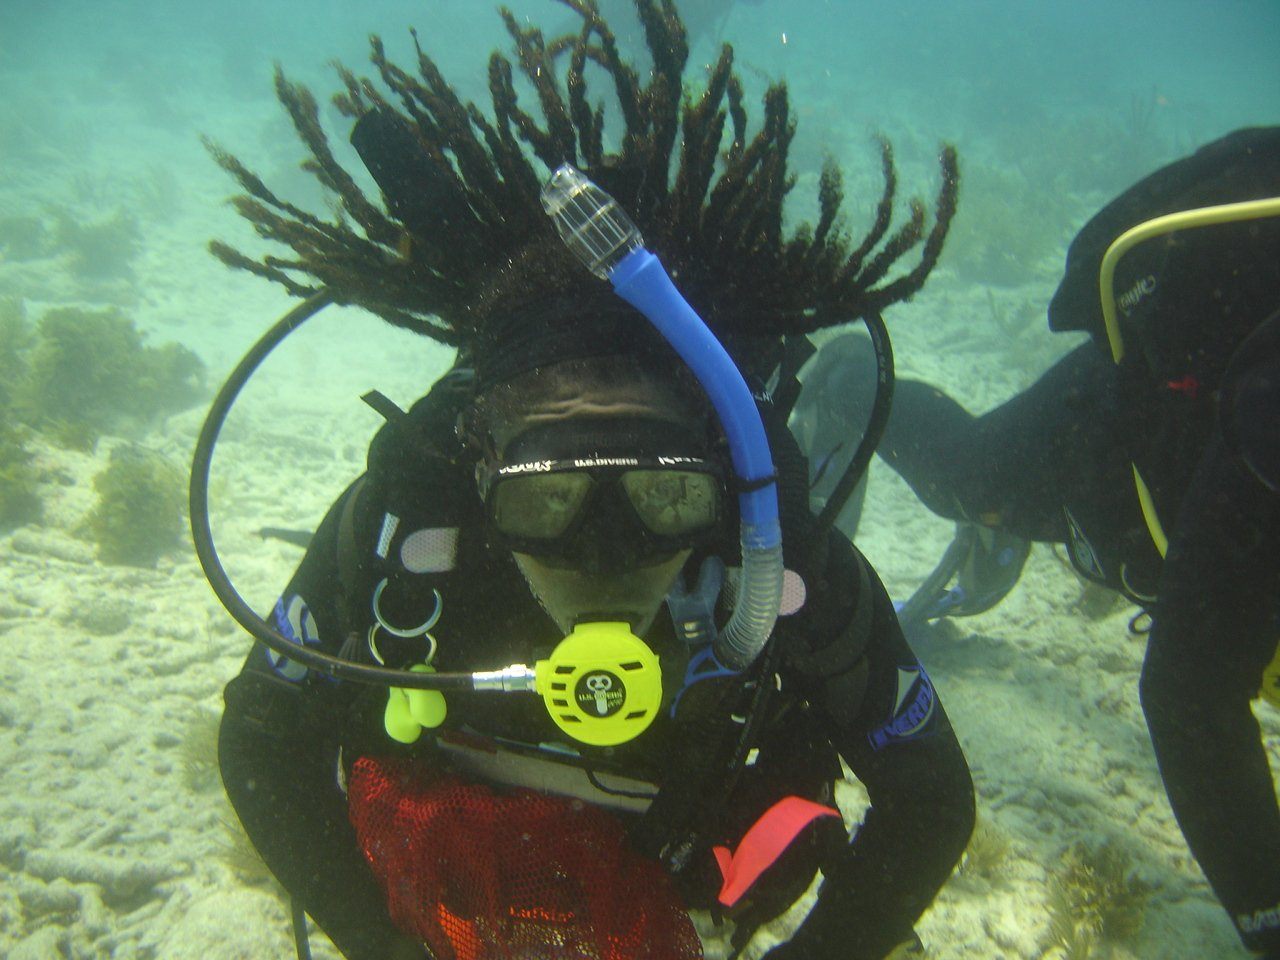 For decades, the nonprofit Diving With a Purpose has trained young Black men, women and teenagers in maritime archaeology methods.